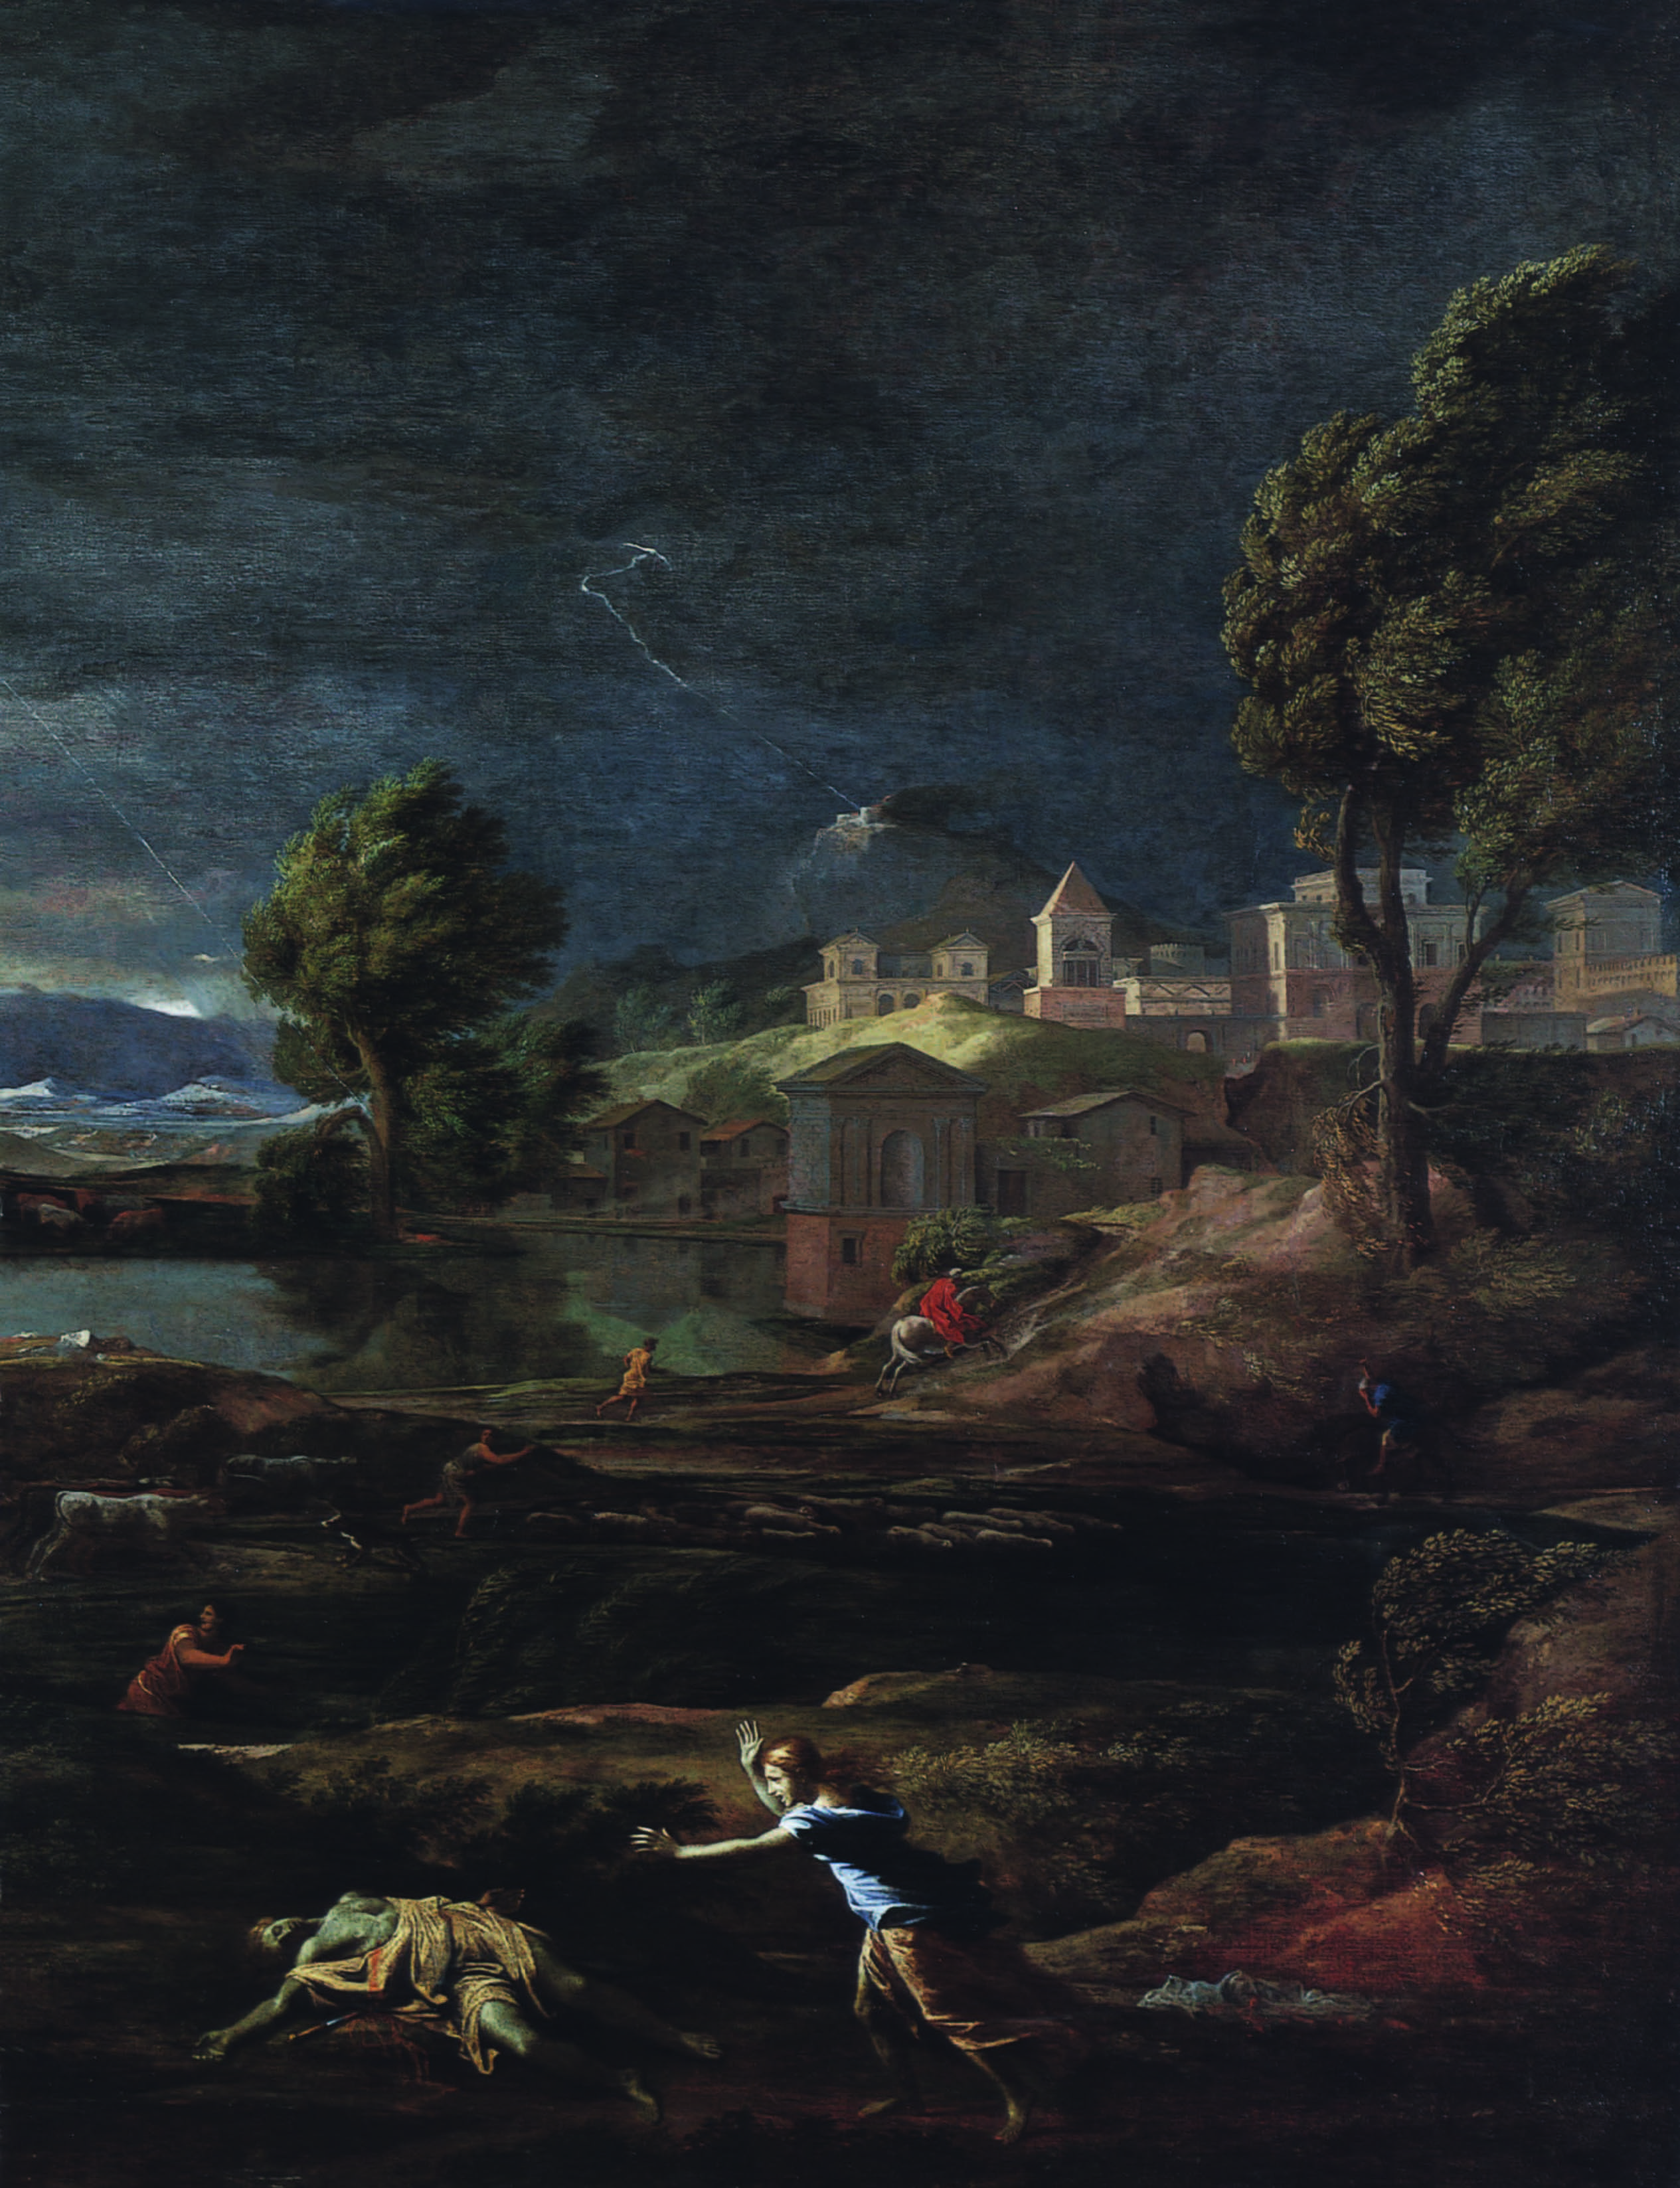 Poussin and Nature: Arcadian Visions